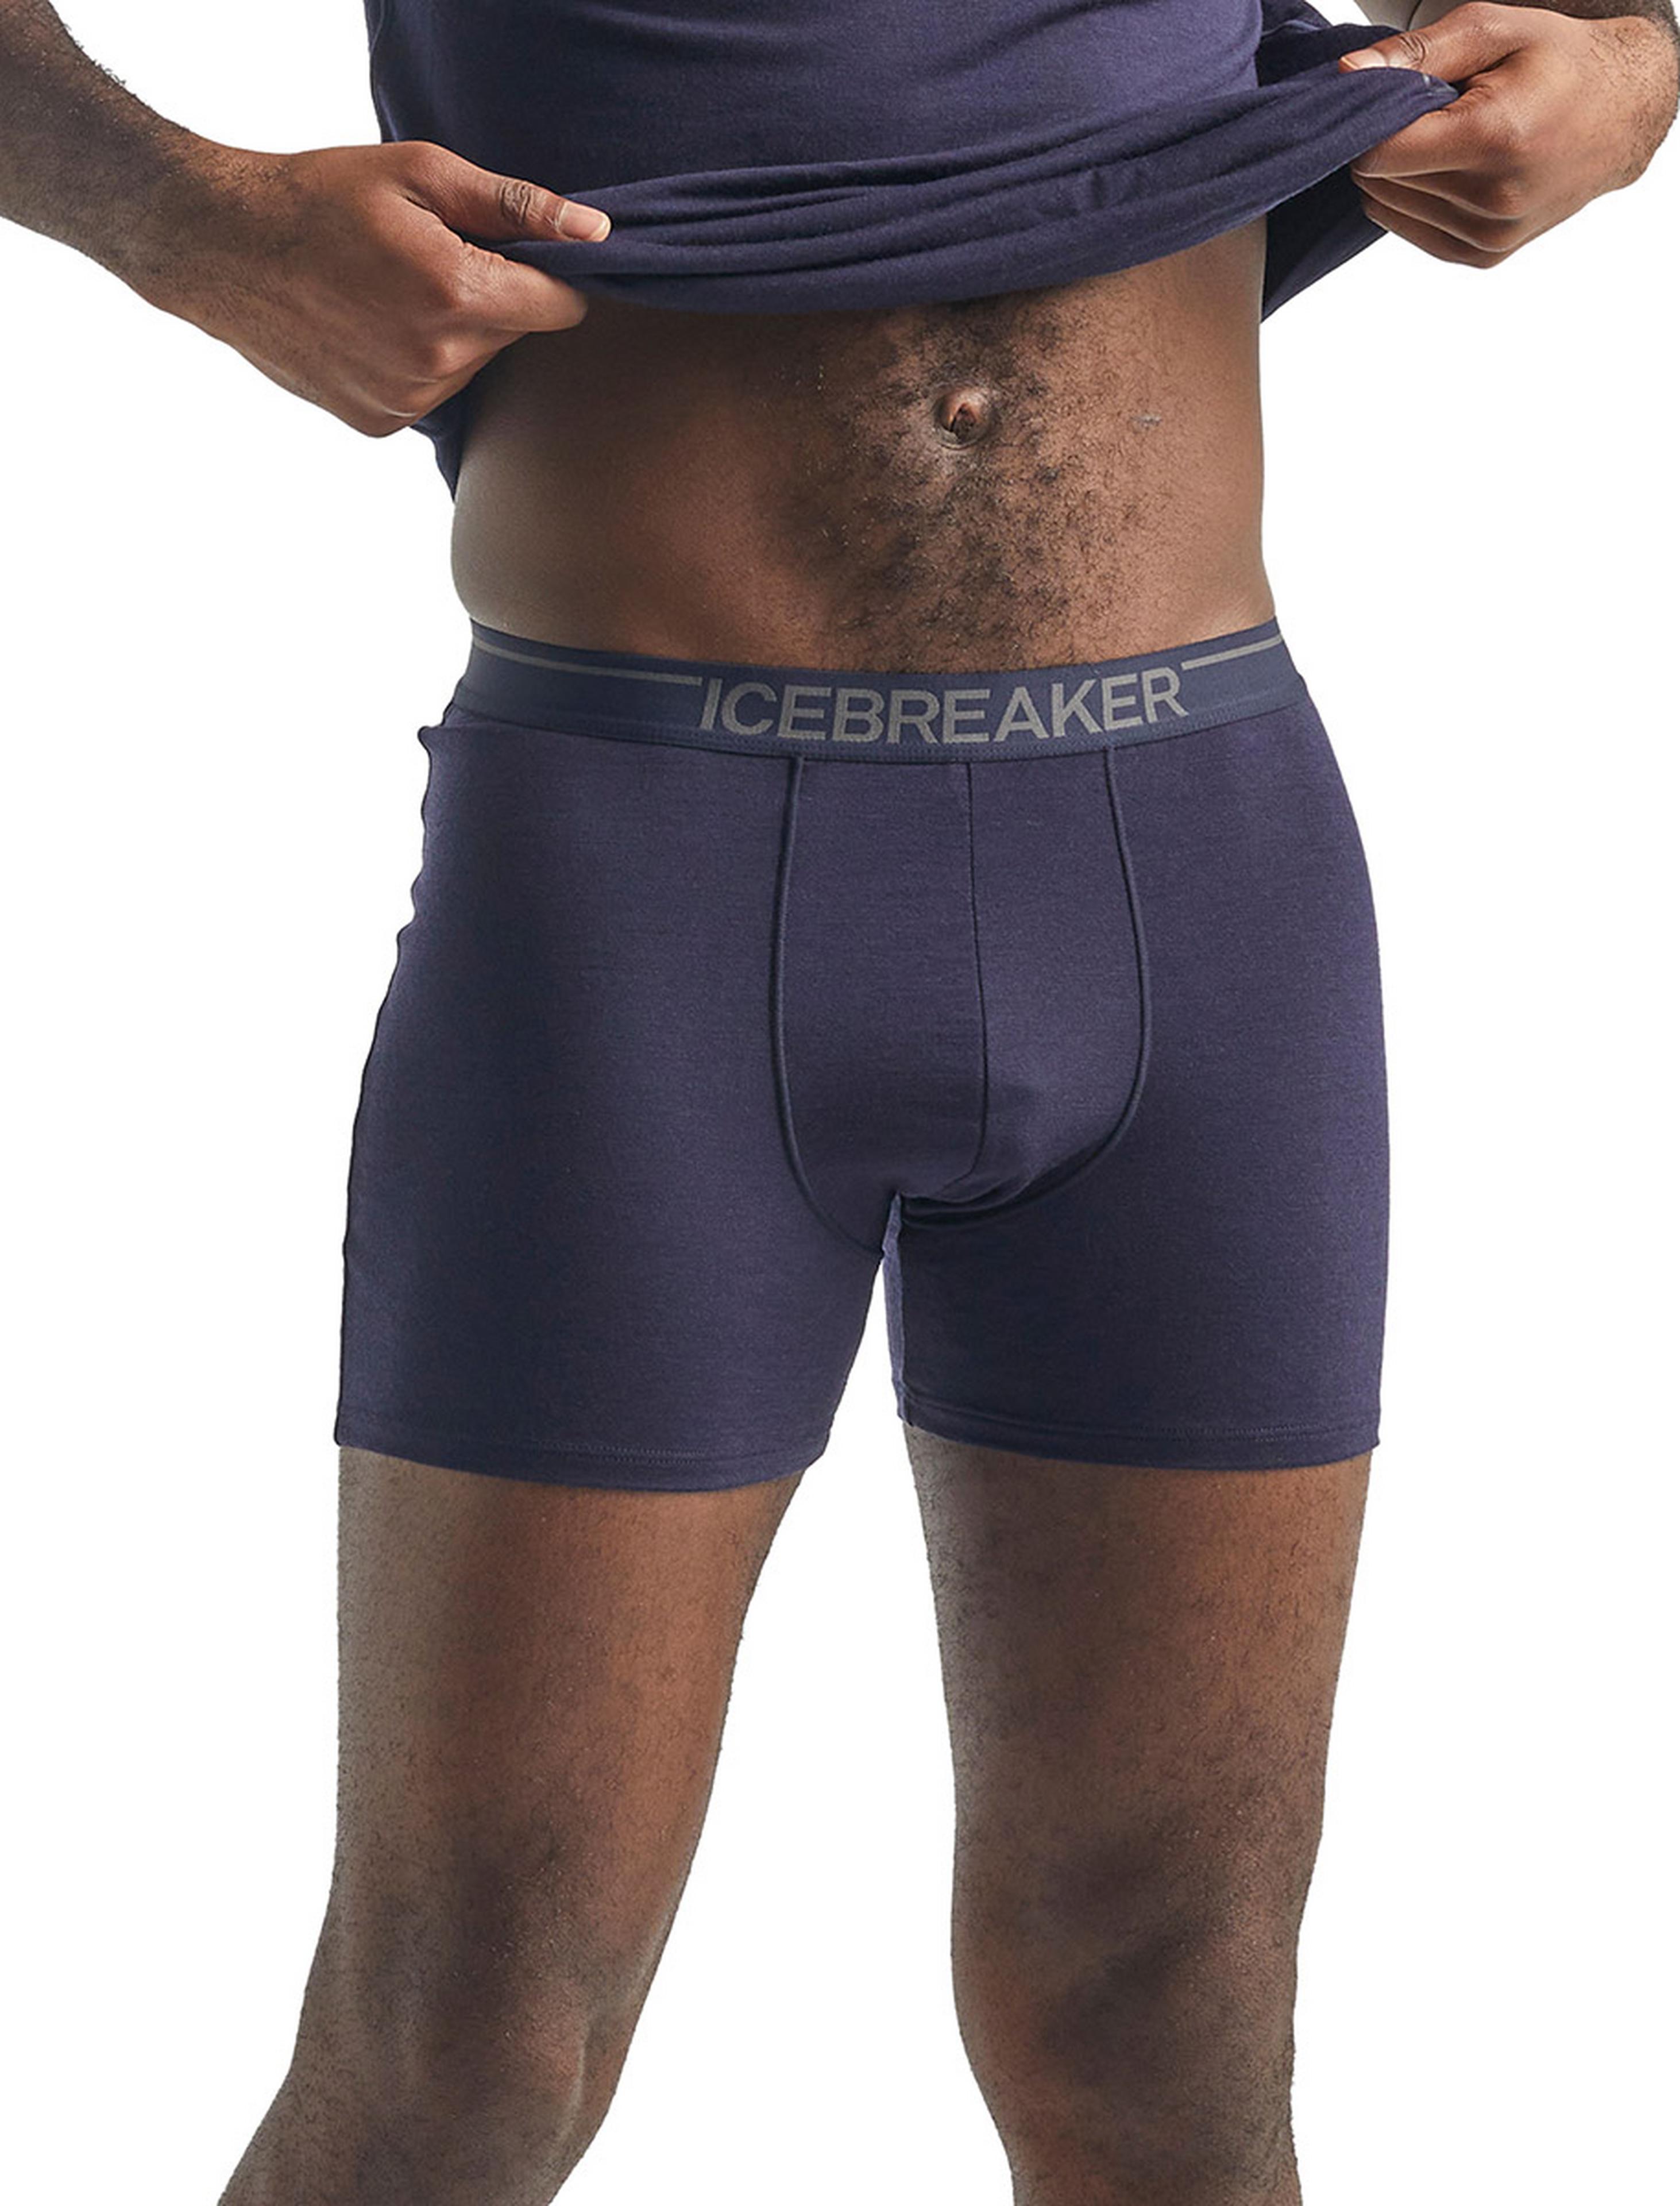 Icebreaker - Anatomica Boxers with Fly